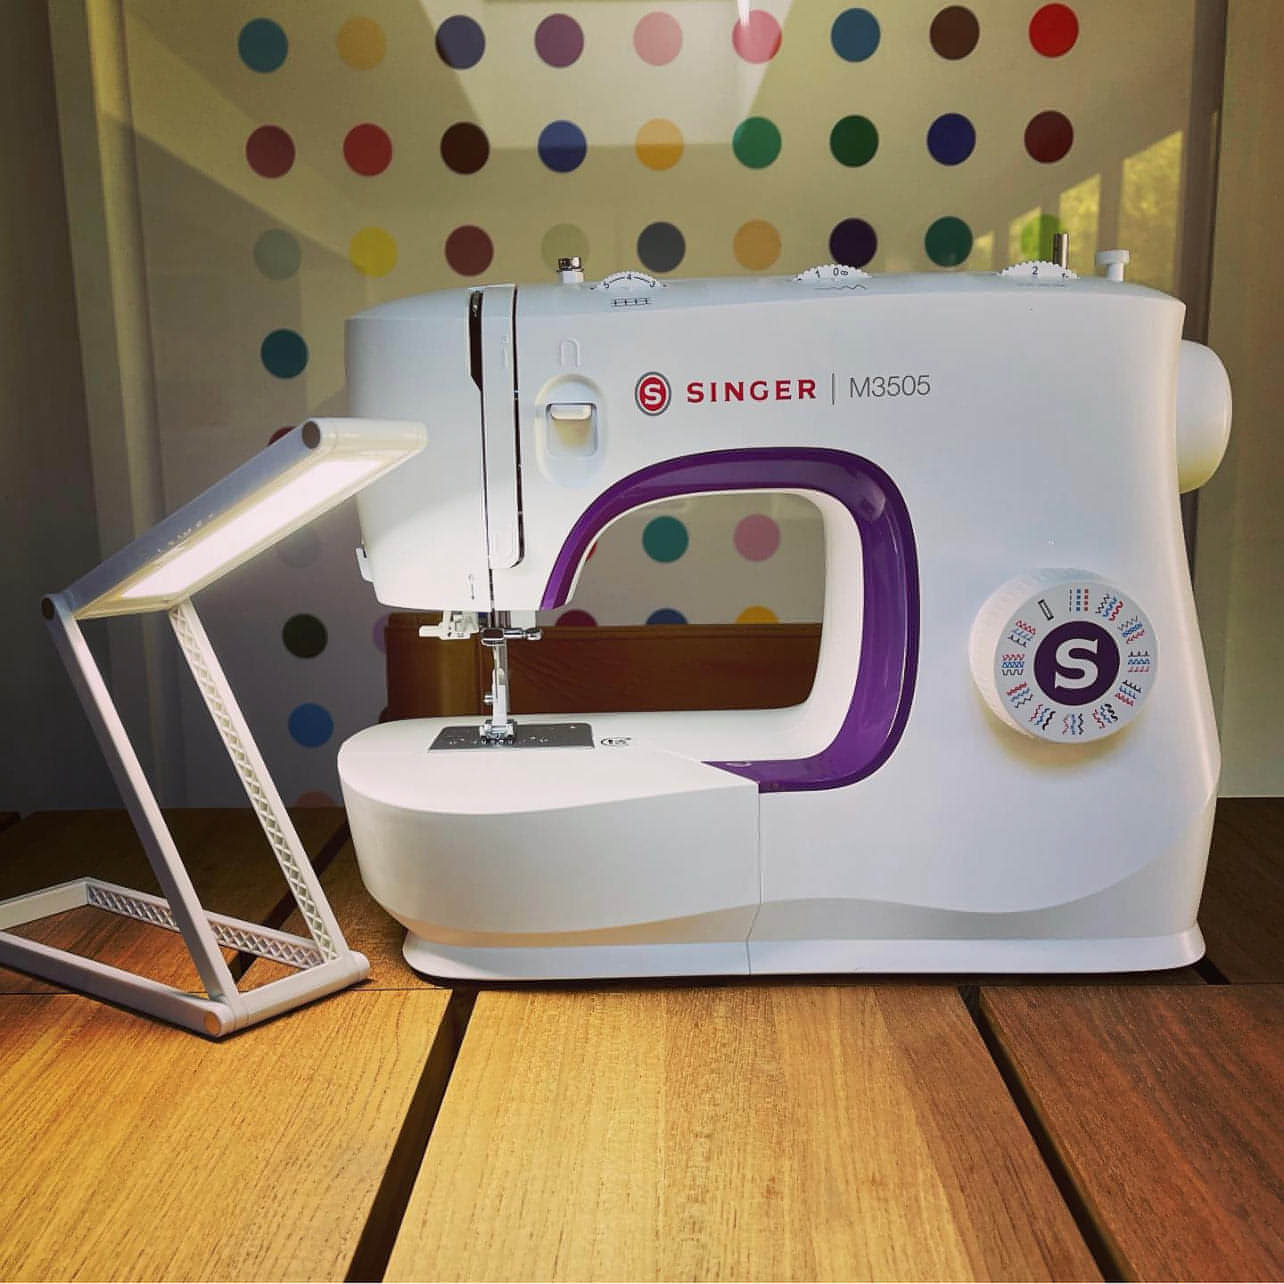 Singer Outlet Foldable LED Lamp - Rechargeable, dimmable and Folds flat, Perfect for extra lighting around a sewing machine or for crafting